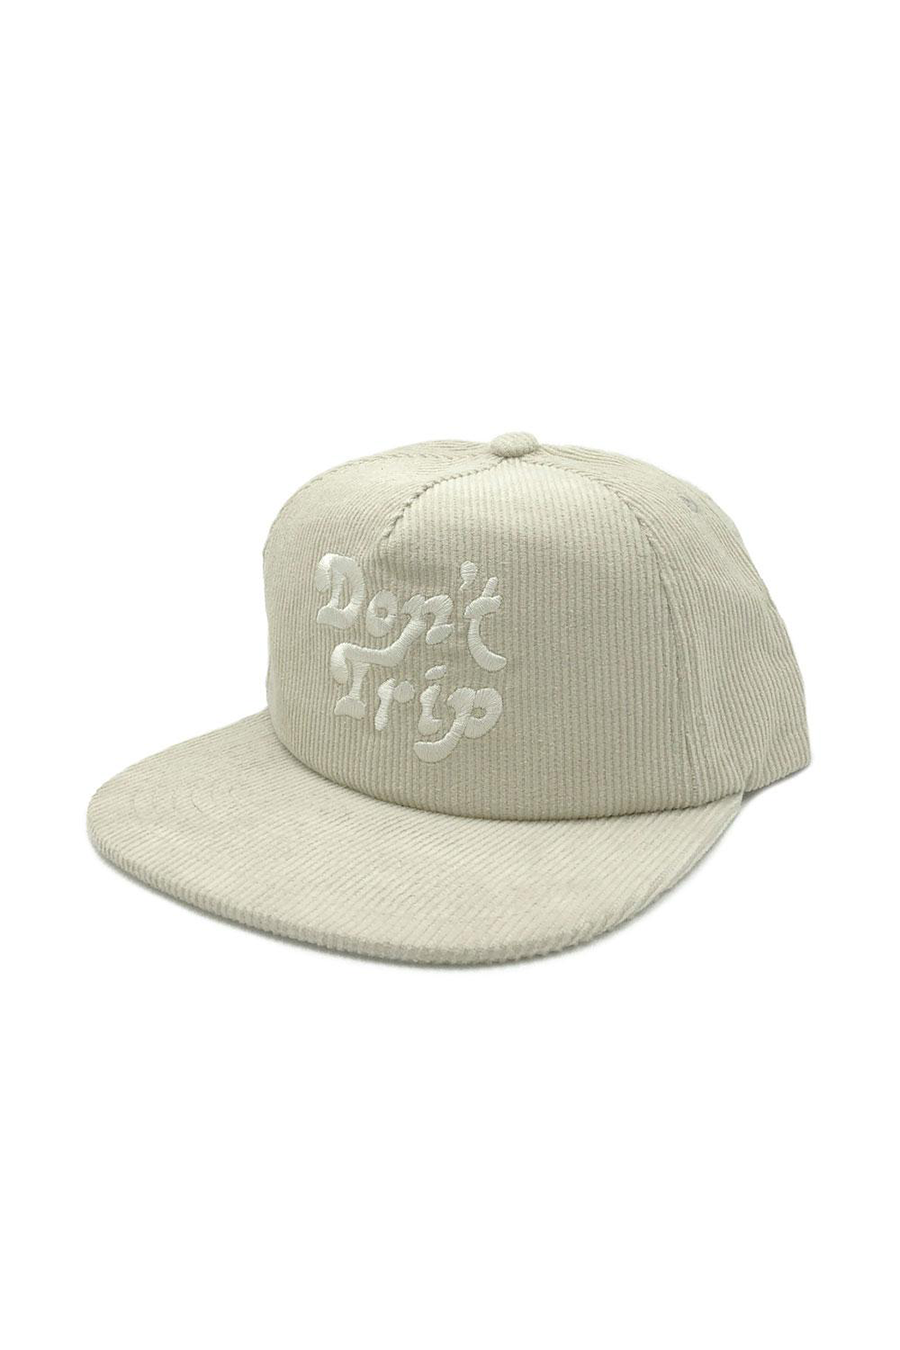 Don't Trip Corduroy Snapback Hat | Cream - Main Image Number 1 of 2